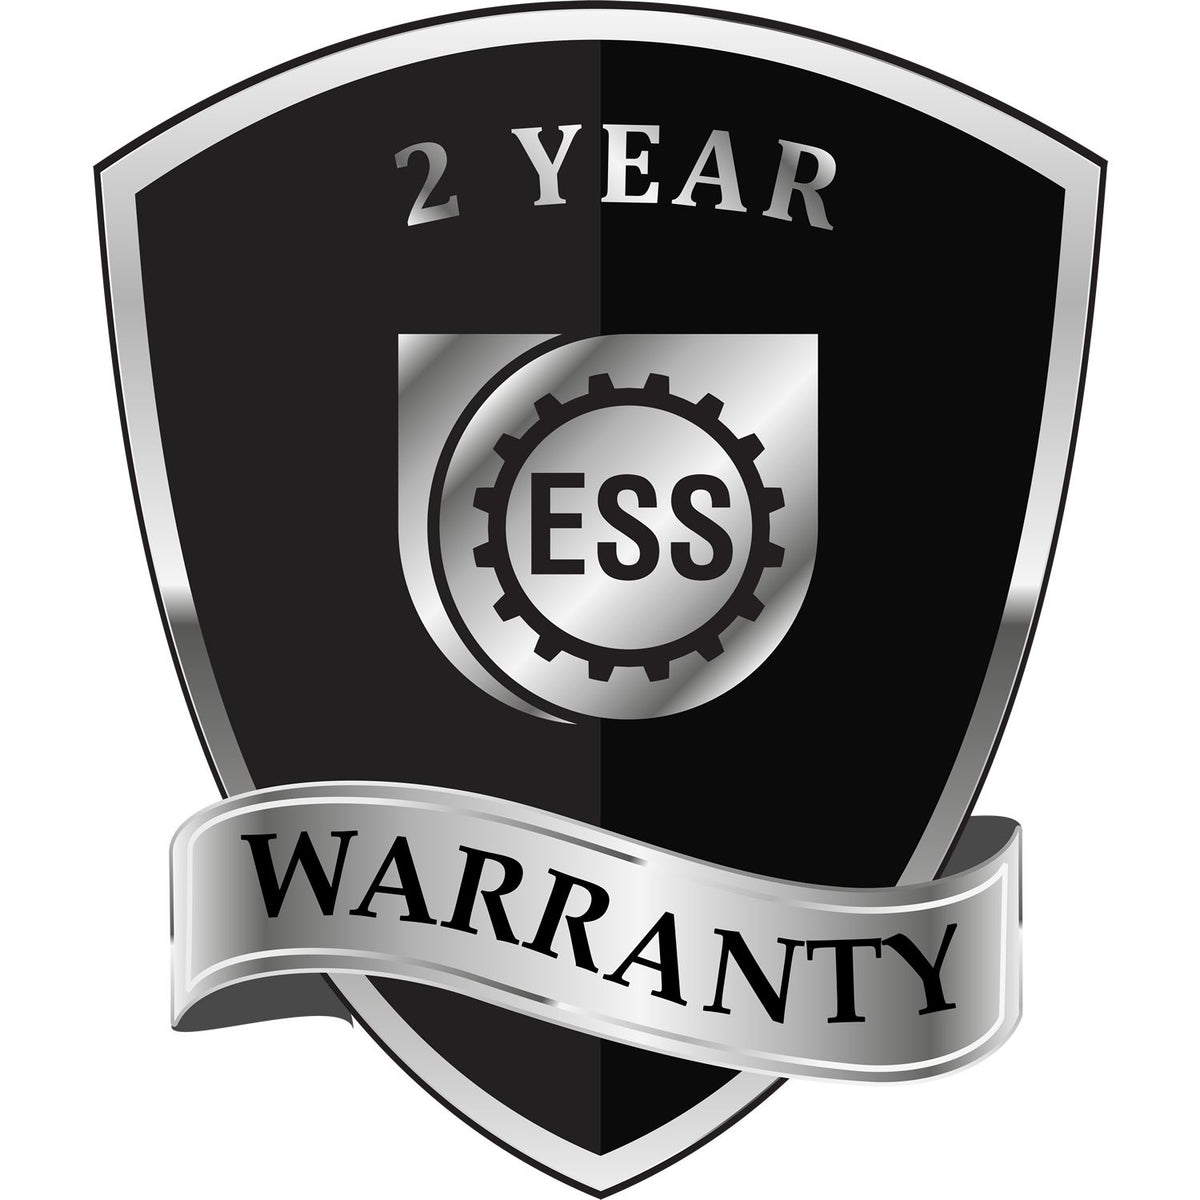 A black and silver badge or emblem showing warranty information for the Heavy Duty Cast Iron Vermont Geologist Seal Embosser